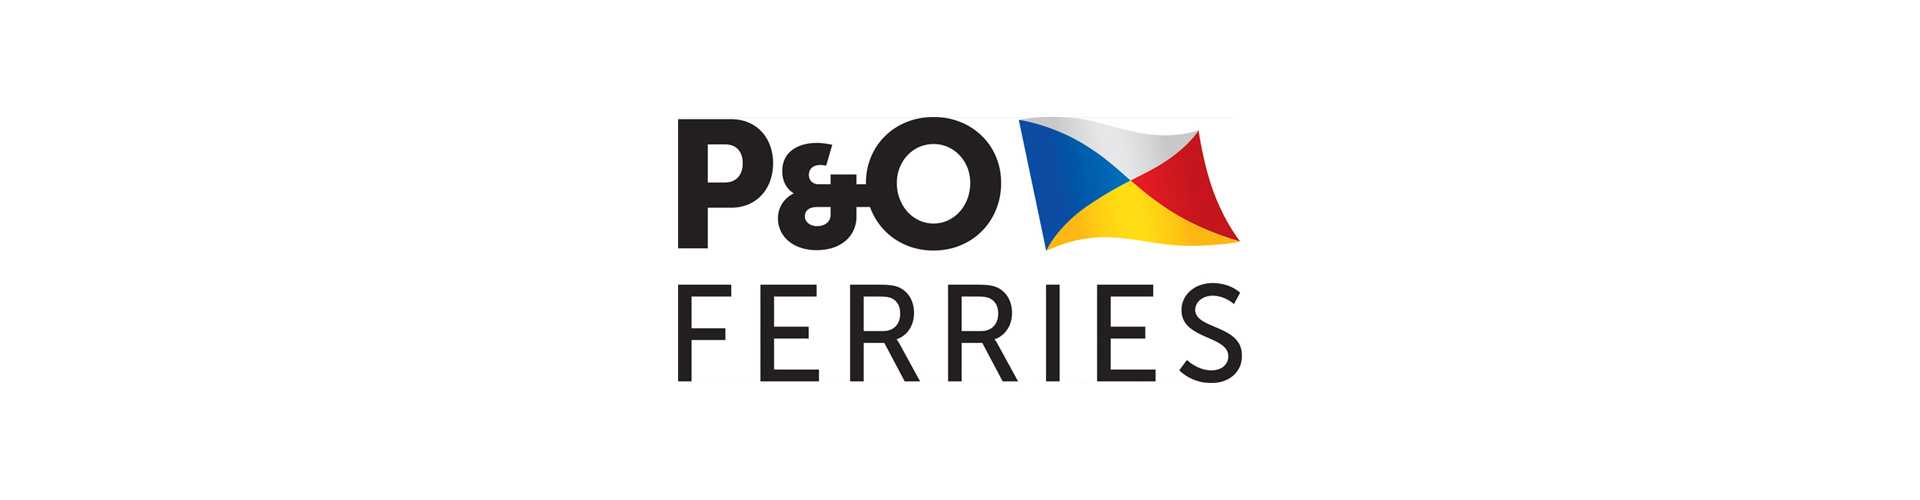 P&O Ferries partners with Hood Group to launch new travel insurance product